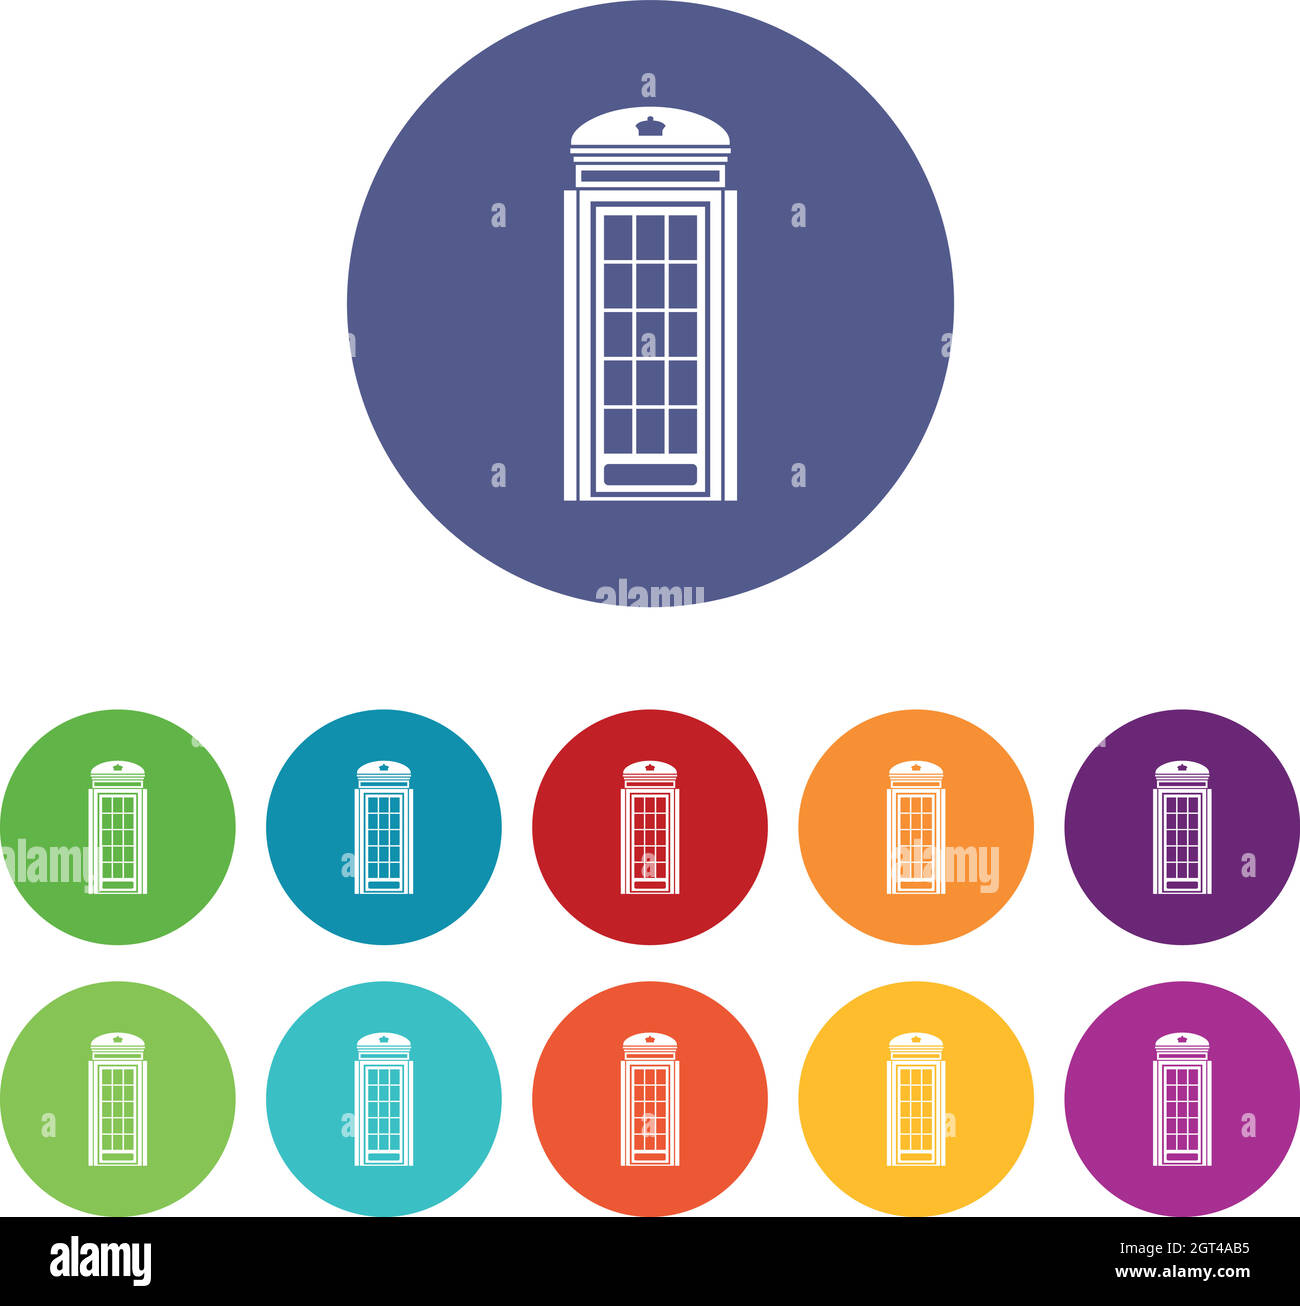 Phone booth set icons Stock Vector